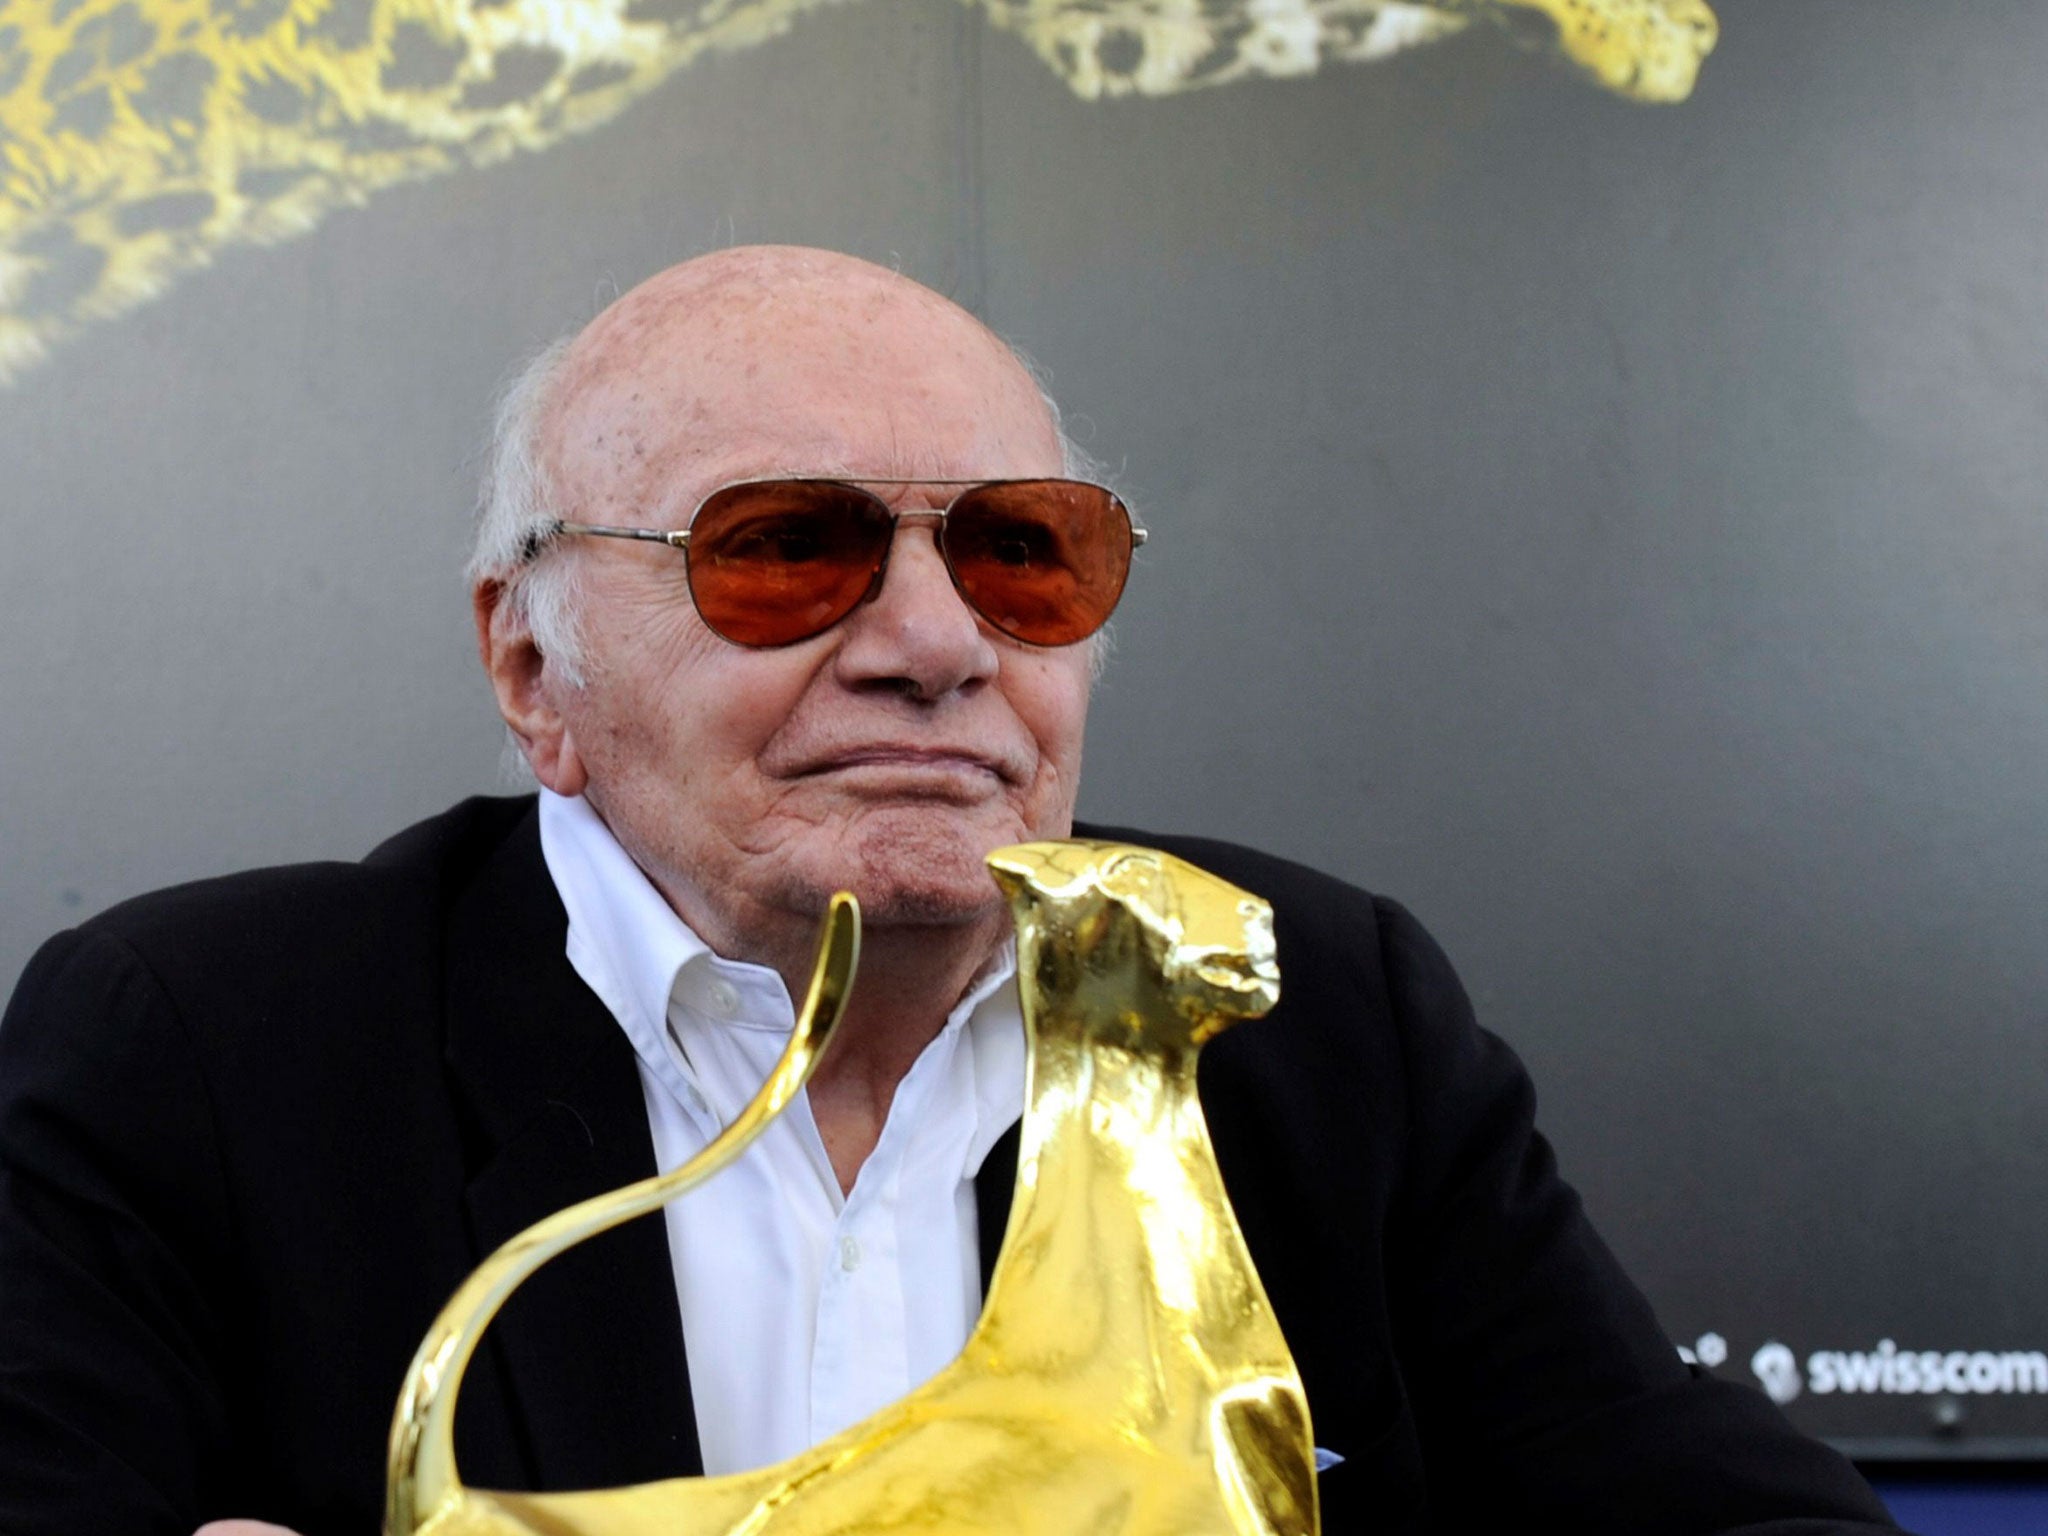 The film director Francesco Rosi has died aged 93